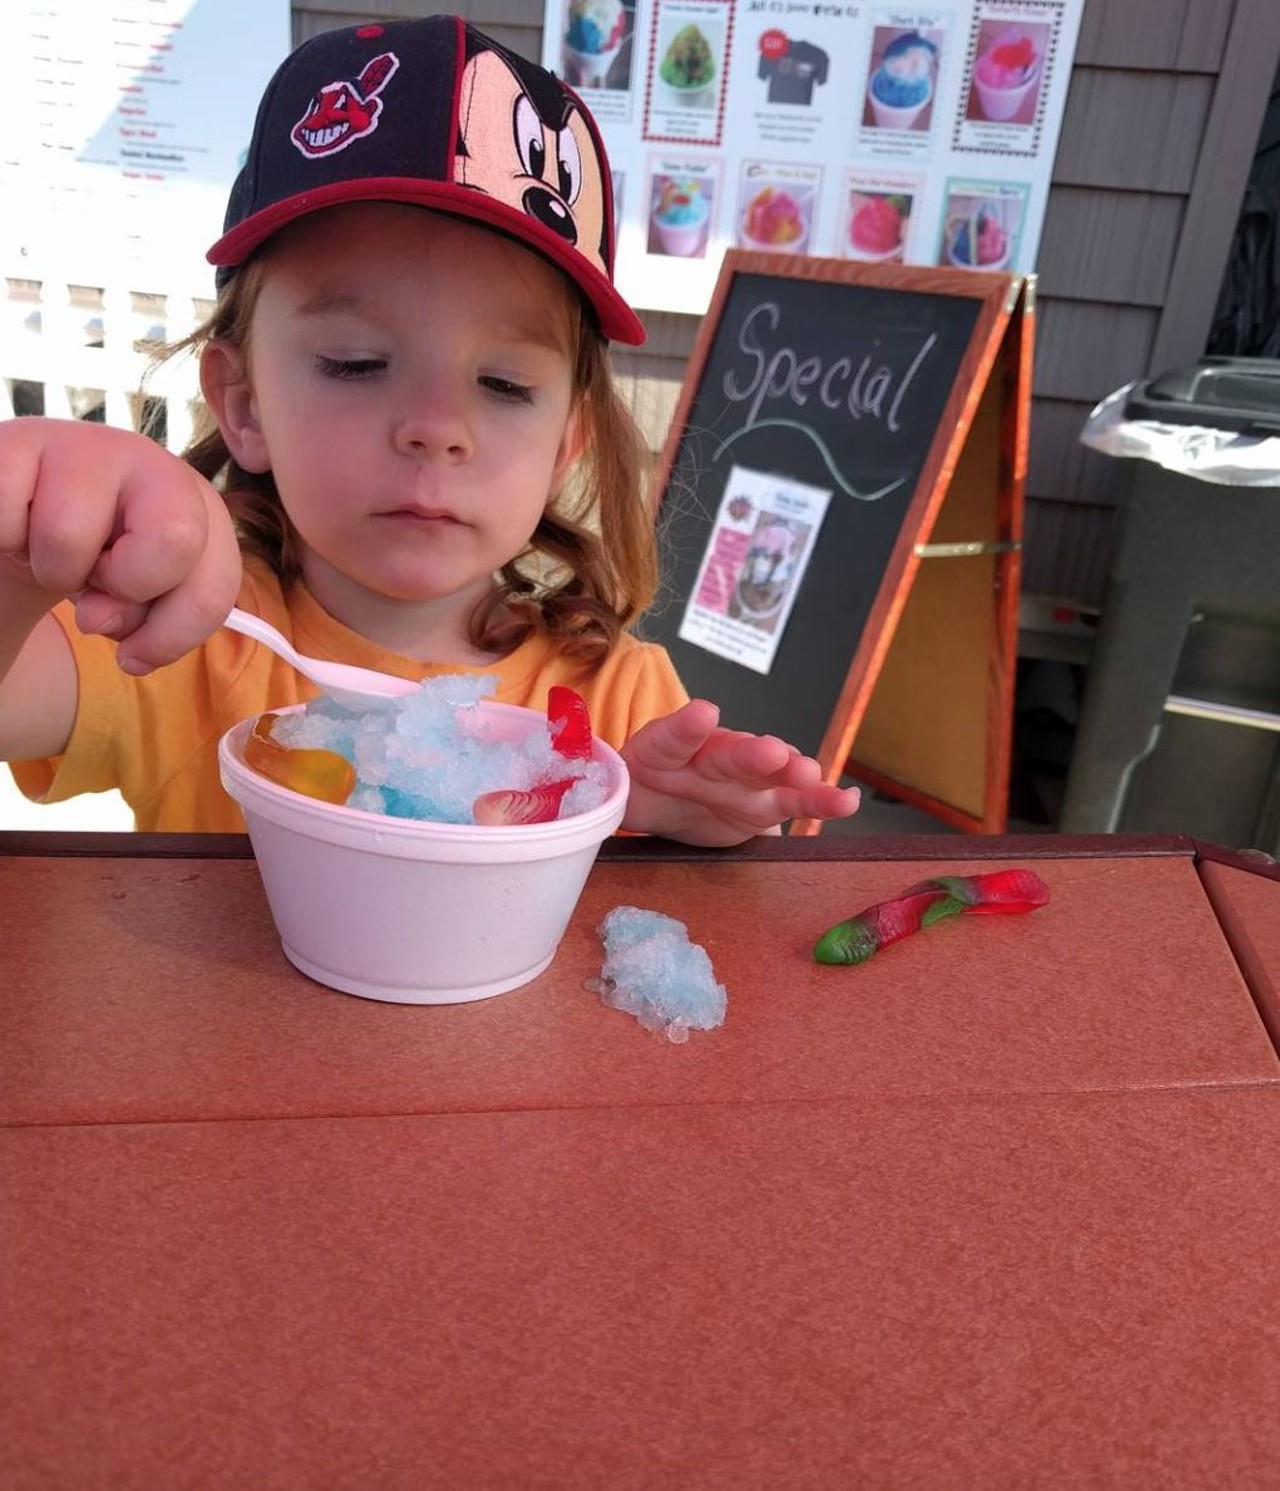  Westcott&#146;s Arctic Ice
48 W. Seminary St., 419-744-0598
Westcott&#146;s Arctic Ice sells over 100 flavors of shaved ice, complete with toppings of your choice. 
Photo via white_mallorya/Instagram